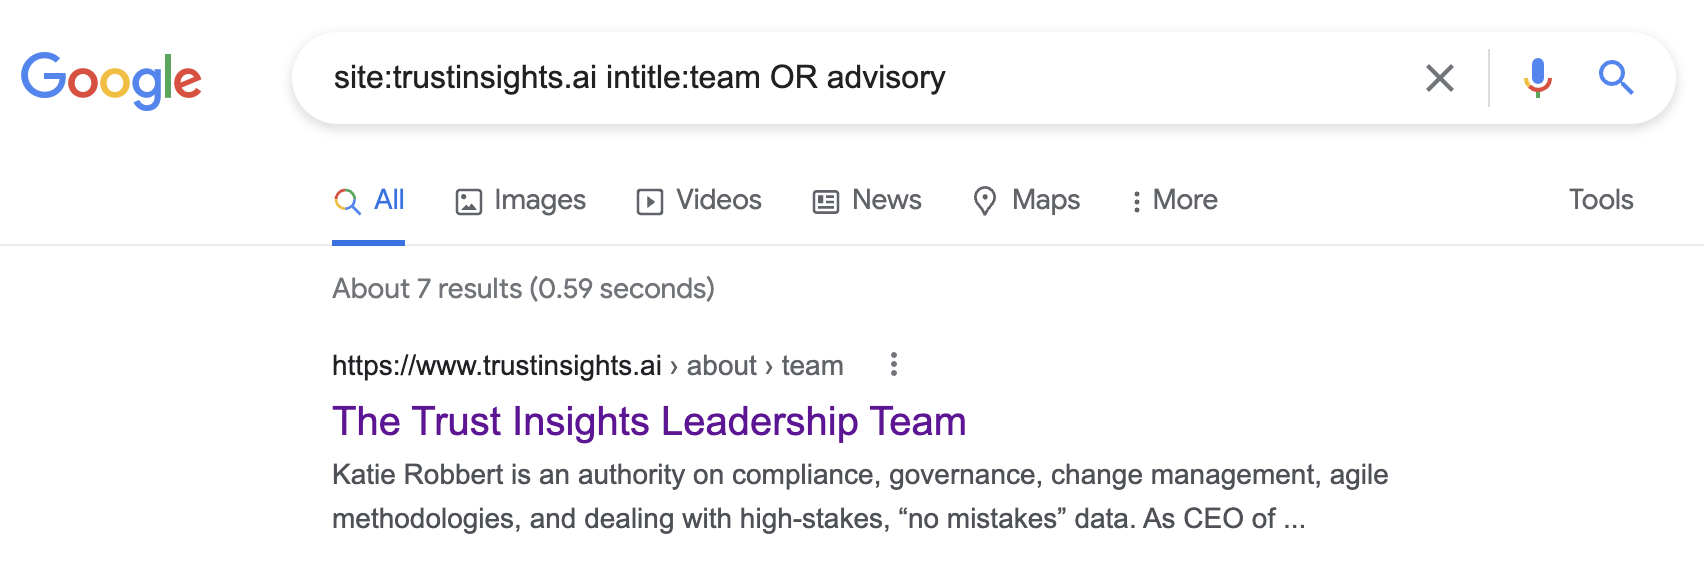 Searching for team and advisory pages in Google